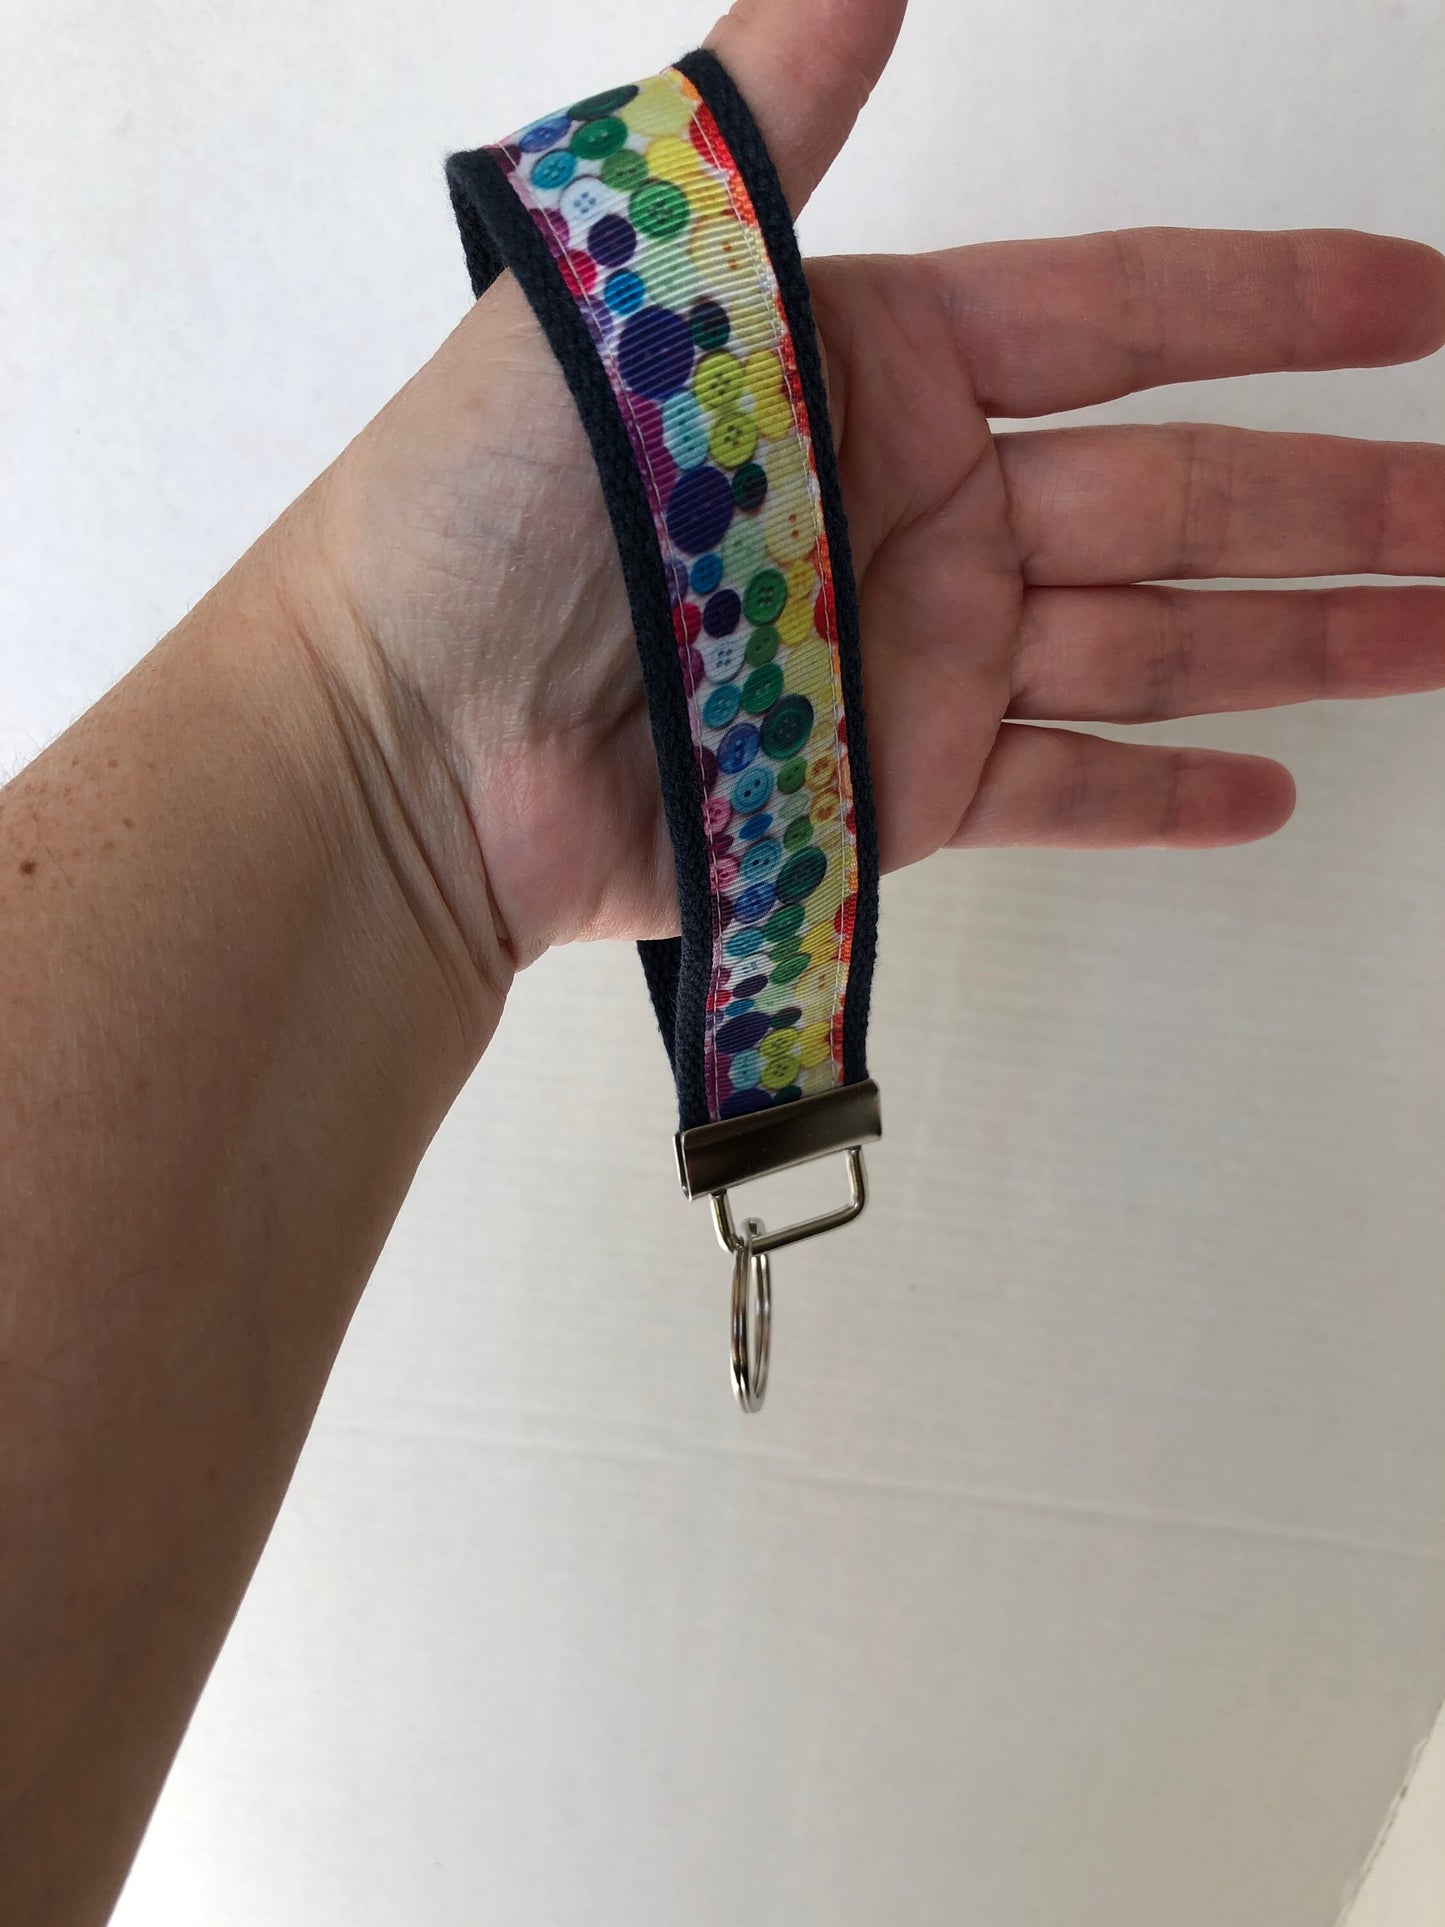 Rainbow Buttons Key Chain, Sewing Themed Key Fob